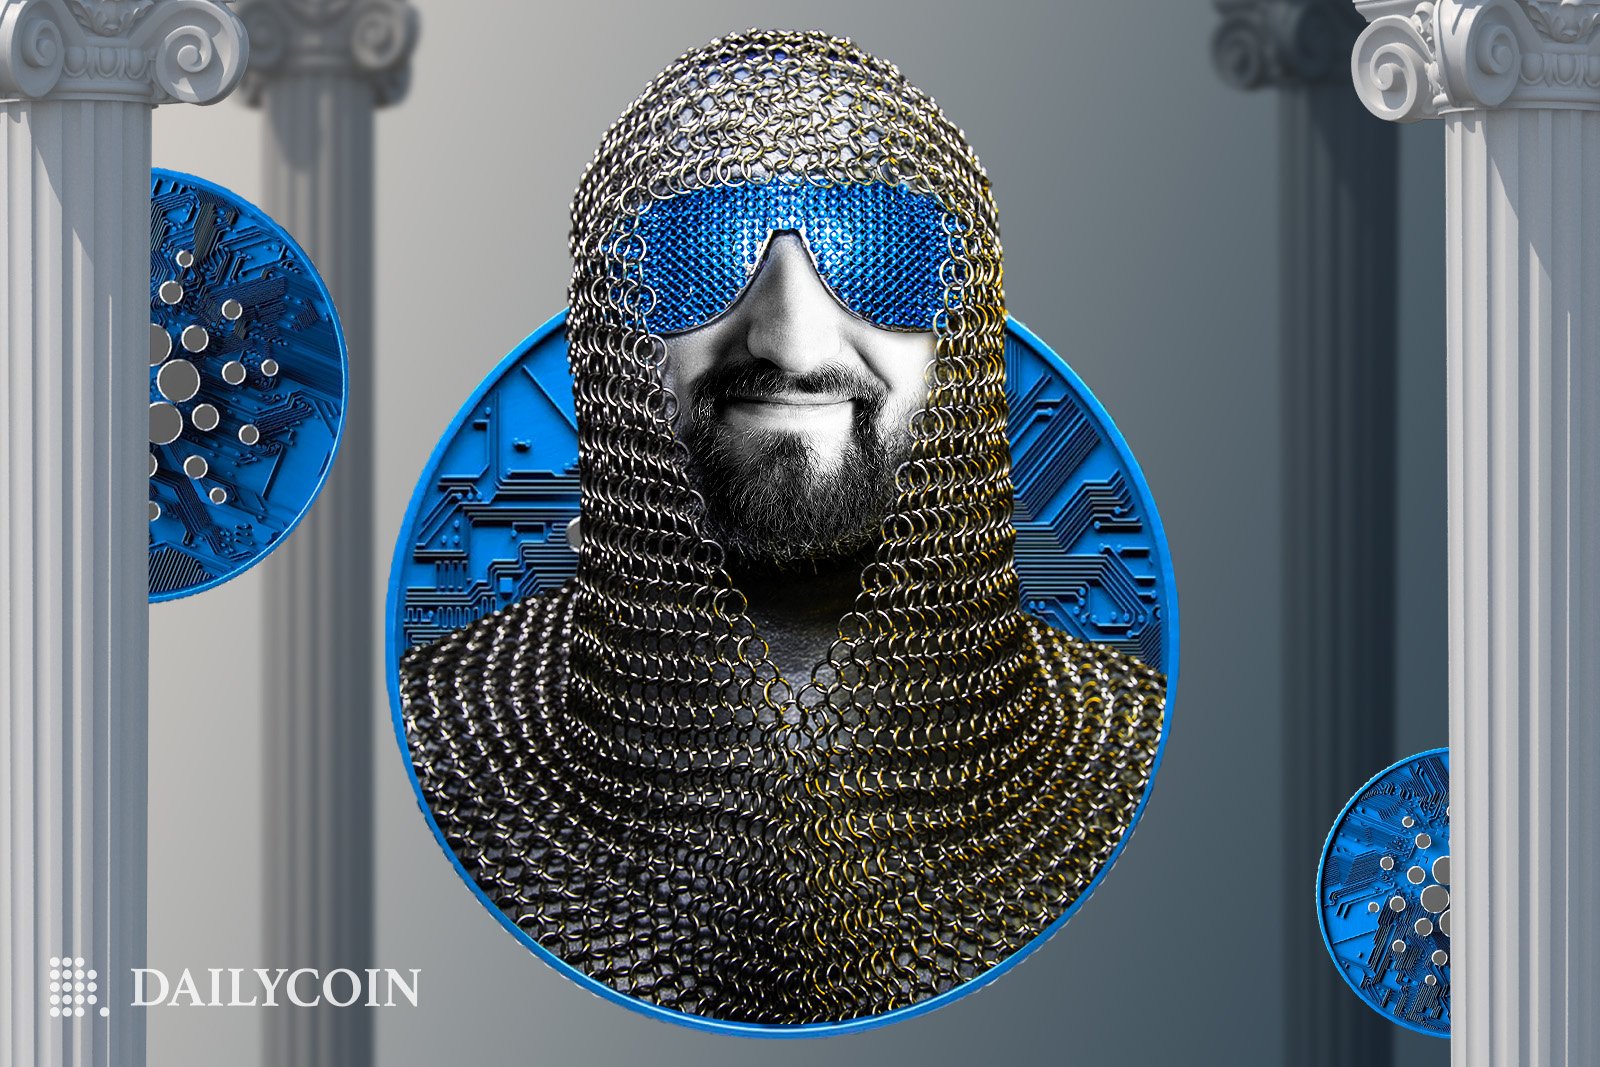 Portrait of Charles Hoskinson with medieval armor, coins, and pillars.